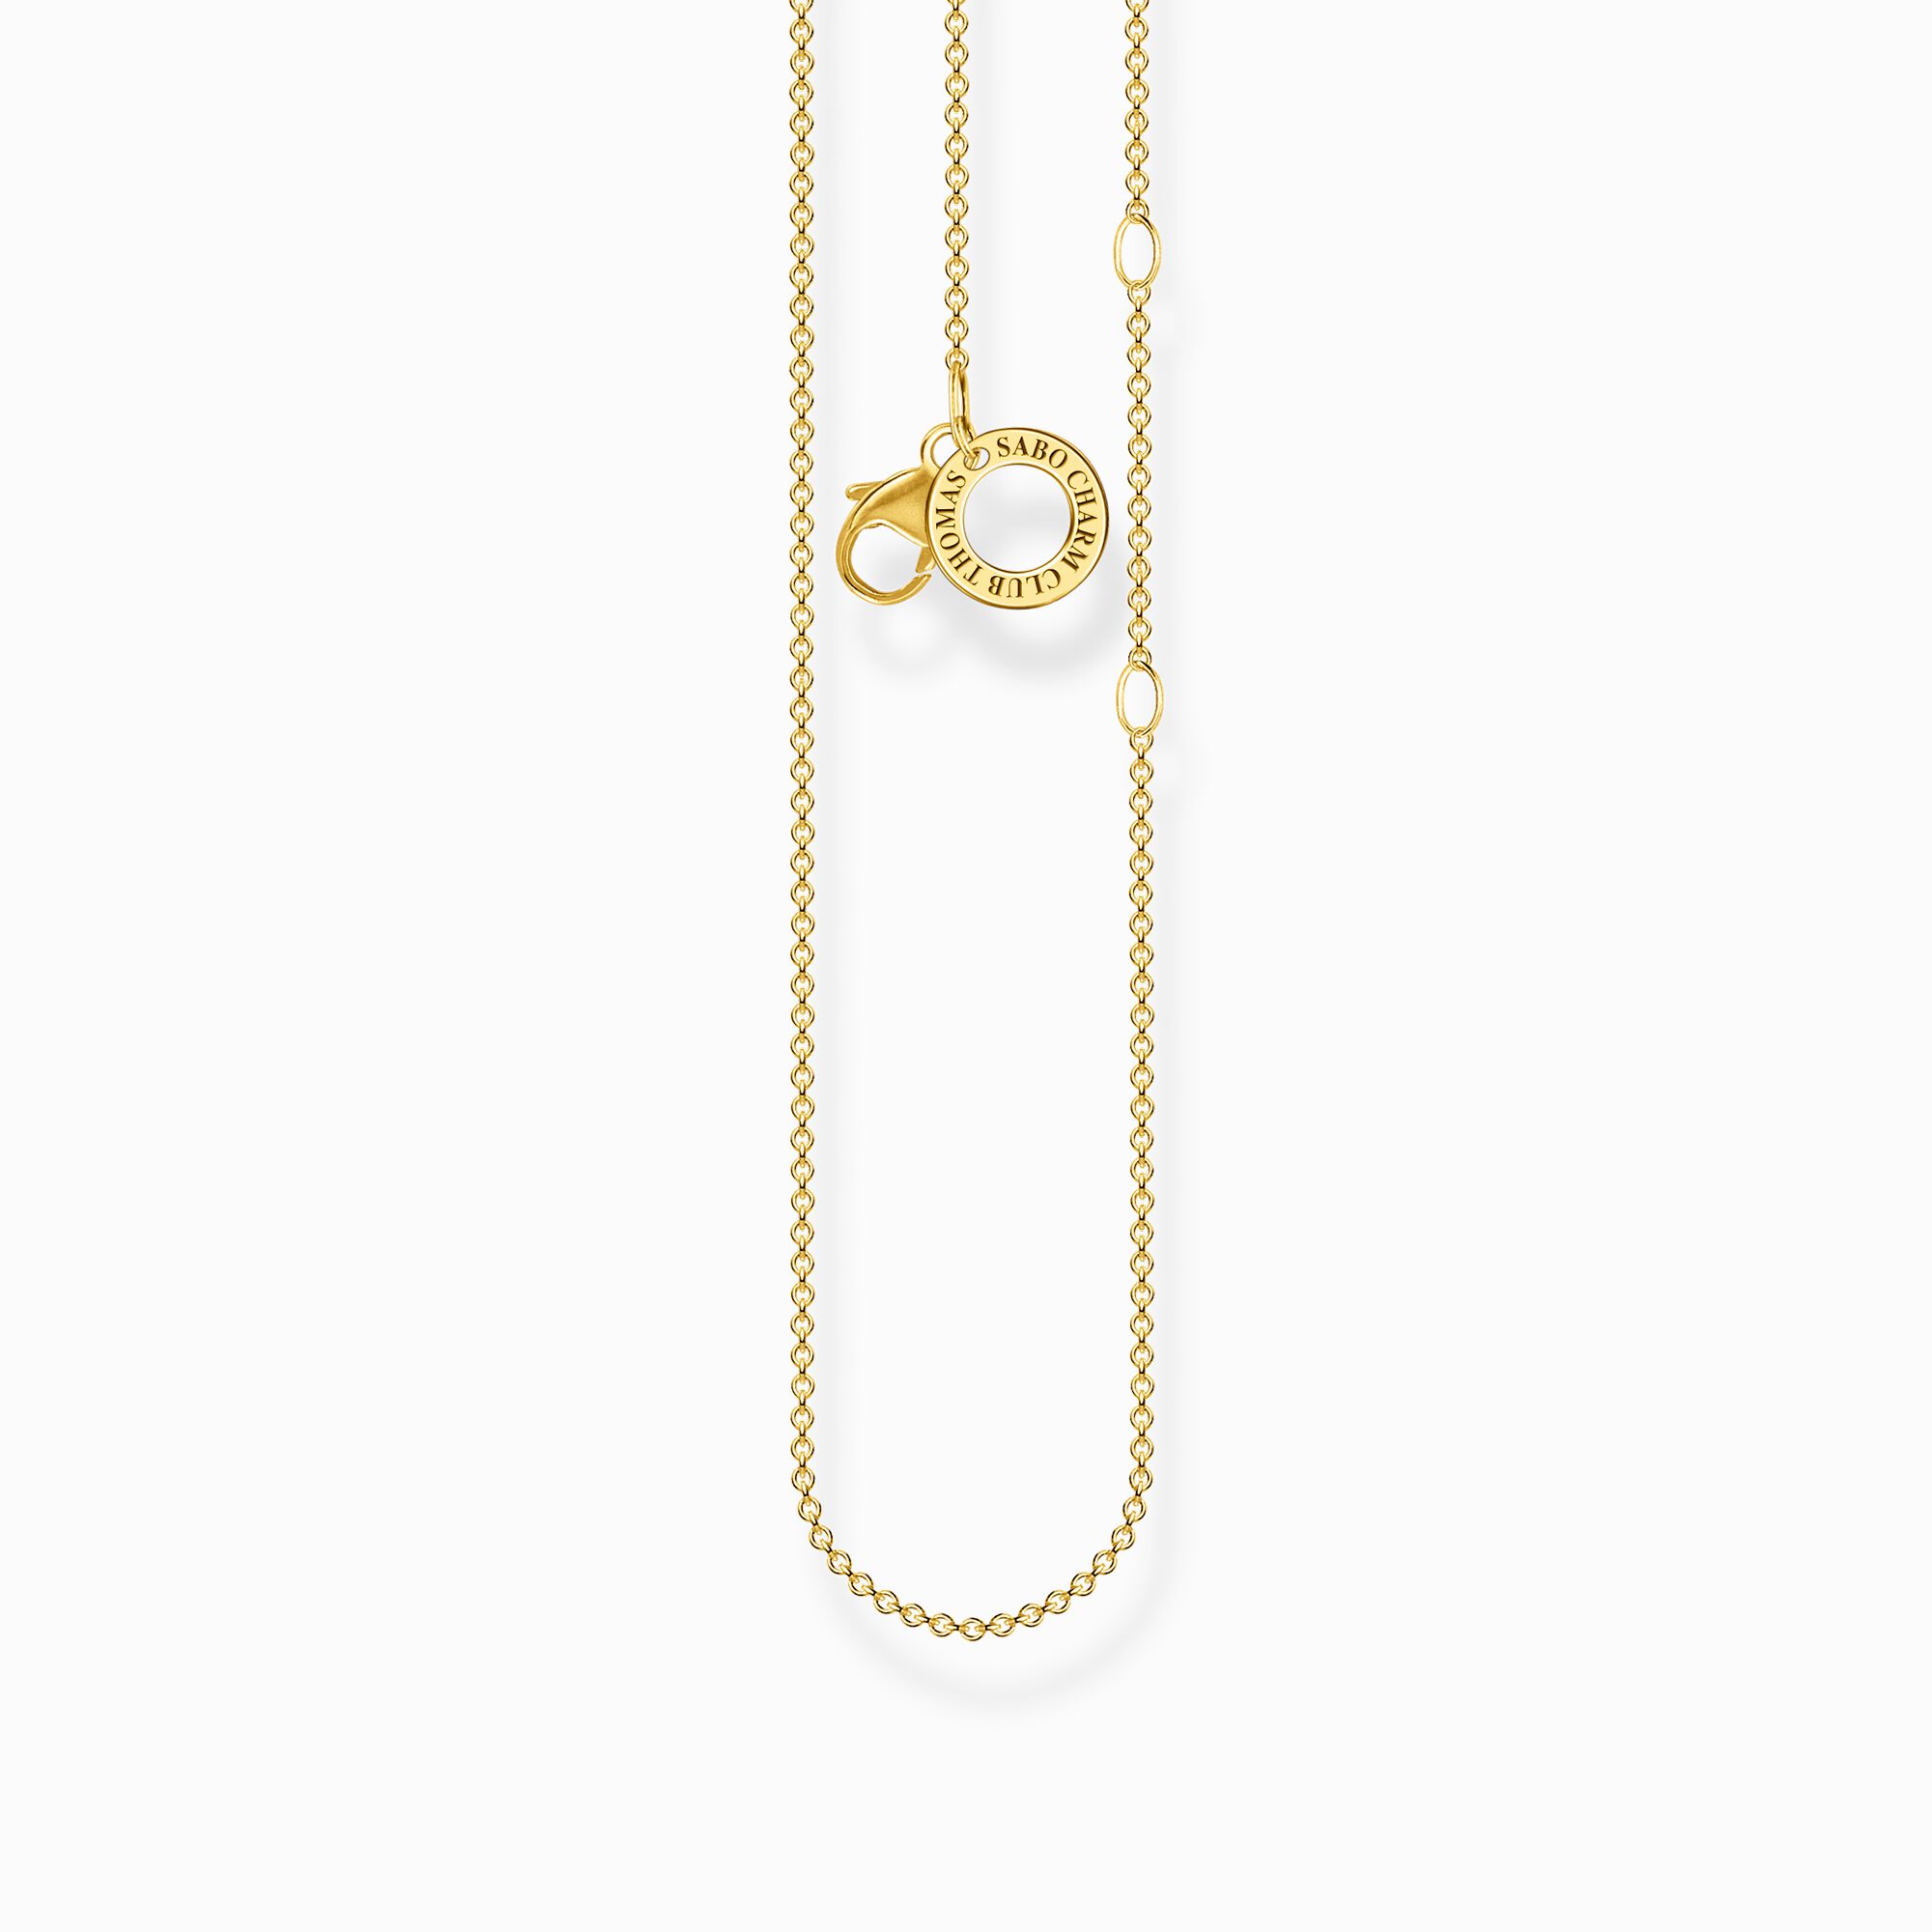 Charm necklace gold from the Charm Club collection in the THOMAS SABO online store